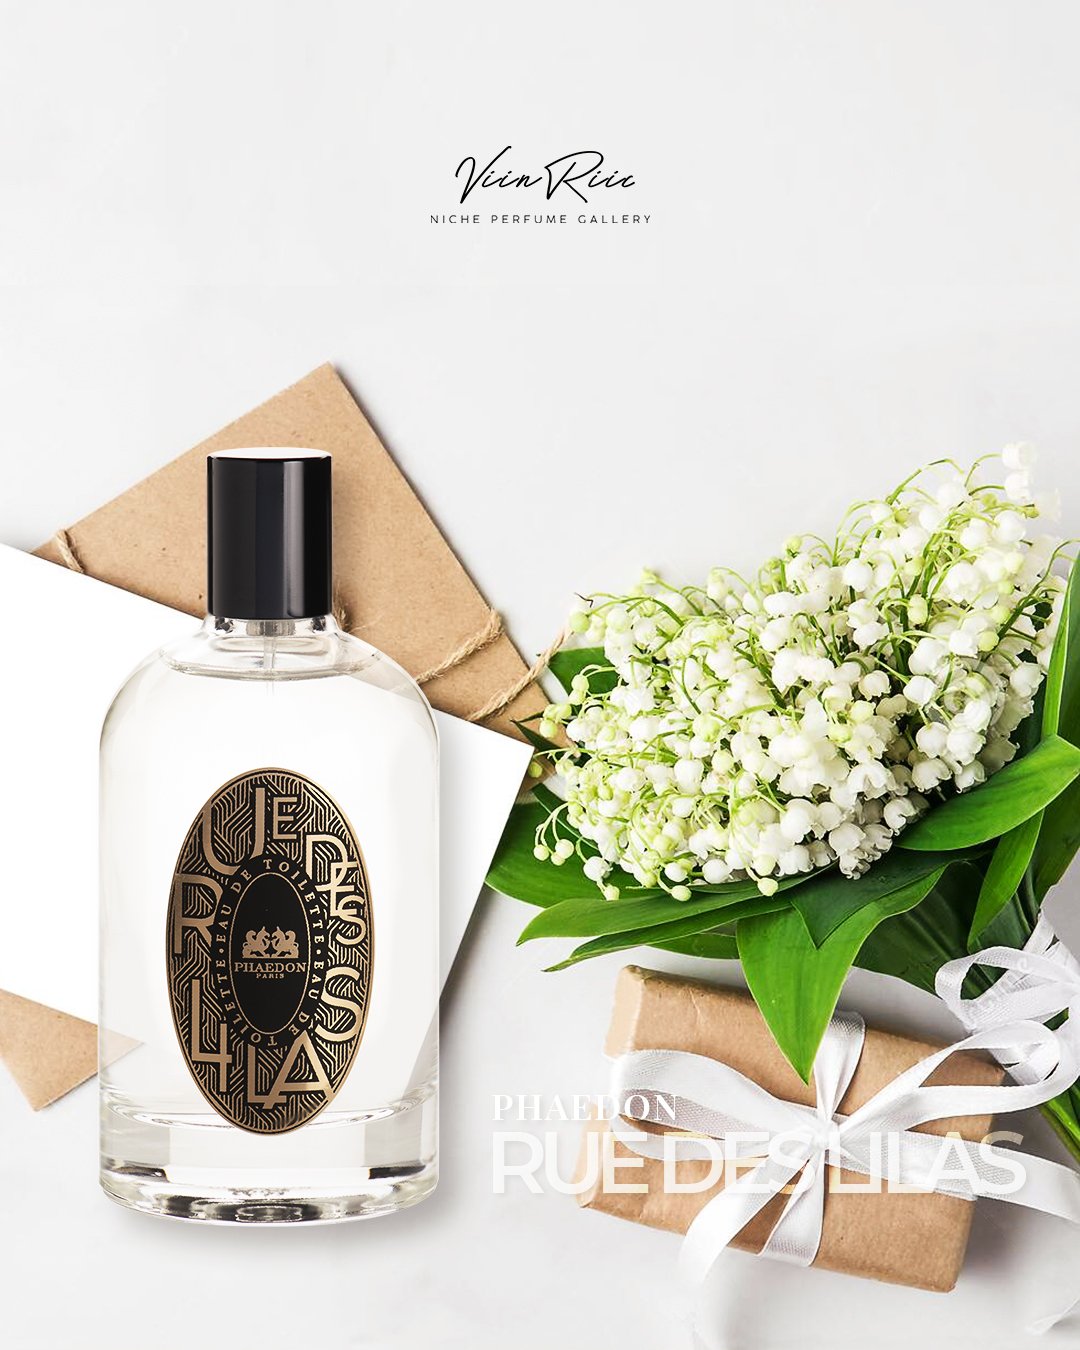 Phaedon's Rue De Lilac is the lucky scent of spring Paris